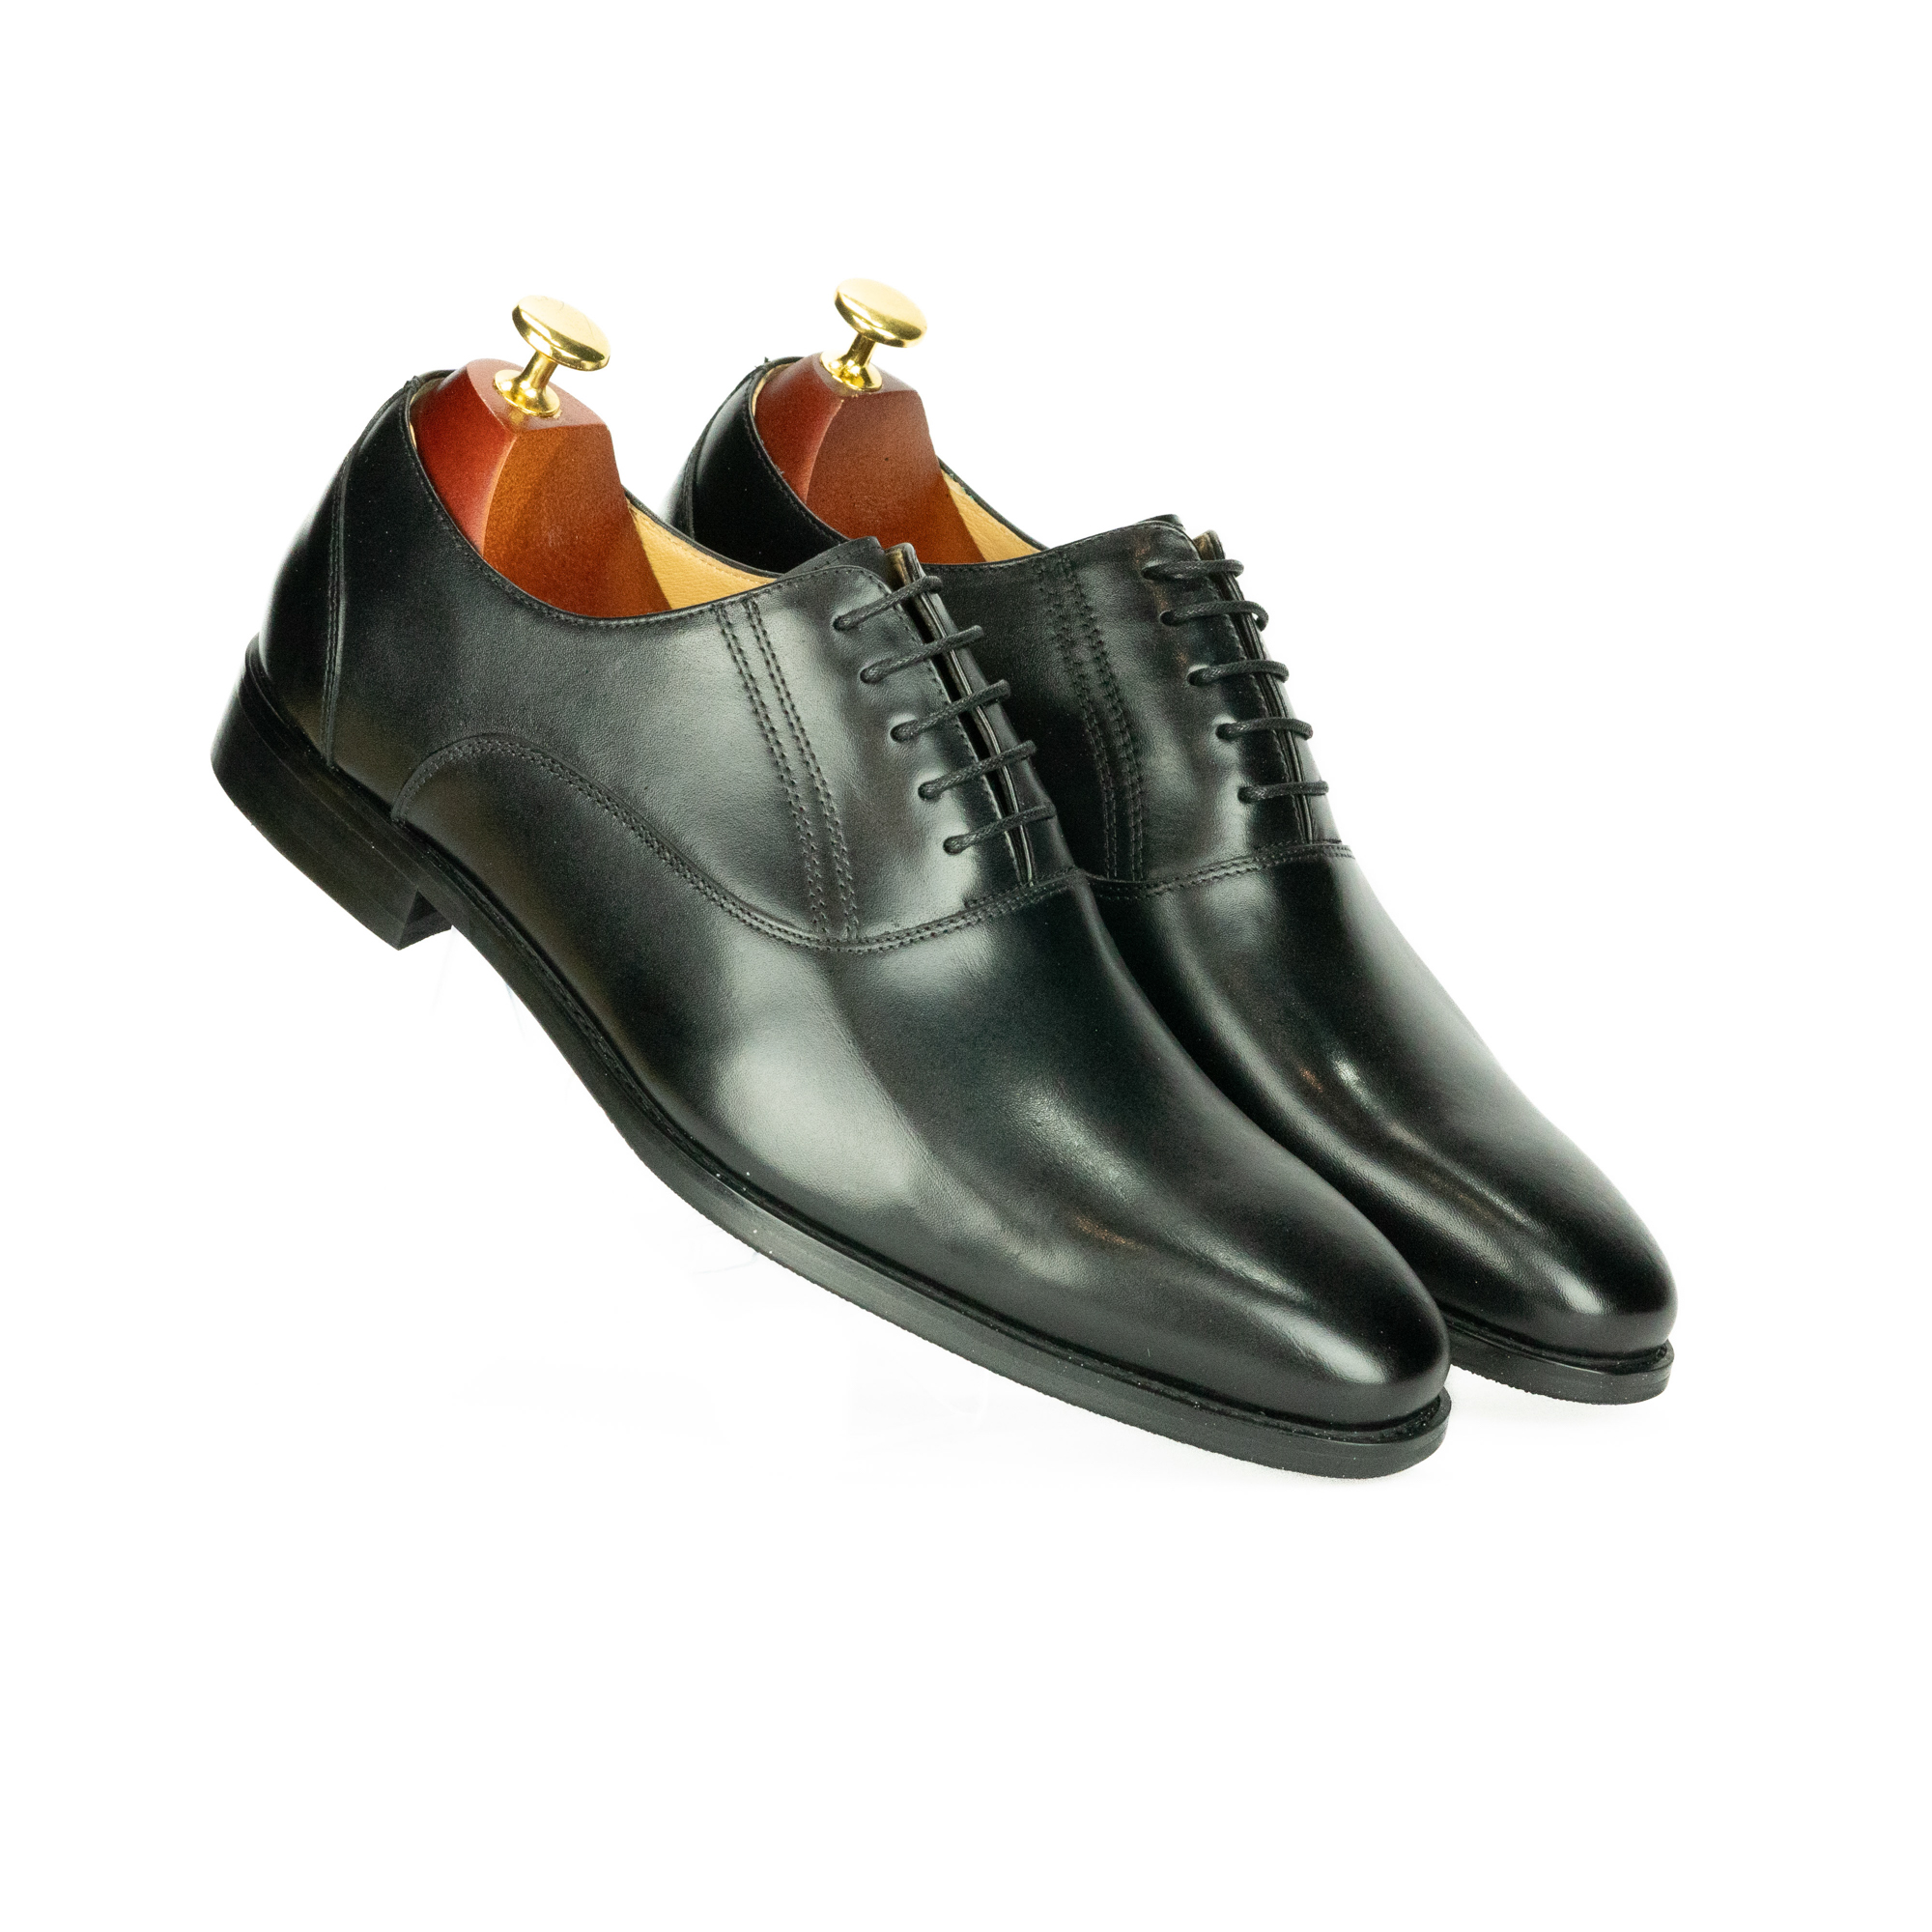 Knightsman House Oxford | Handmade Classic Men's Leather Shoes in Black